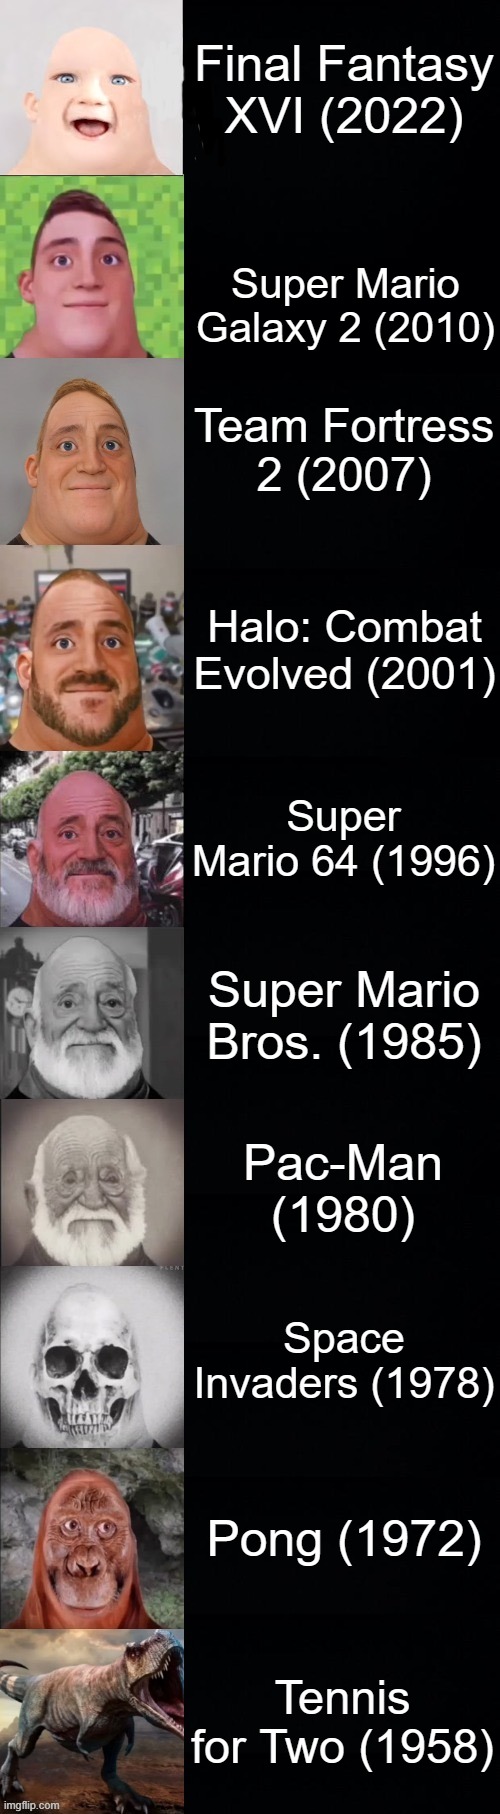 Mr Incredible becoming old | Final Fantasy XVI (2022); Super Mario Galaxy 2 (2010); Team Fortress 2 (2007); Halo: Combat Evolved (2001); Super Mario 64 (1996); Super Mario Bros. (1985); Pac-Man (1980); Space Invaders (1978); Pong (1972); Tennis for Two (1958) | image tagged in mr incredible becoming old | made w/ Imgflip meme maker